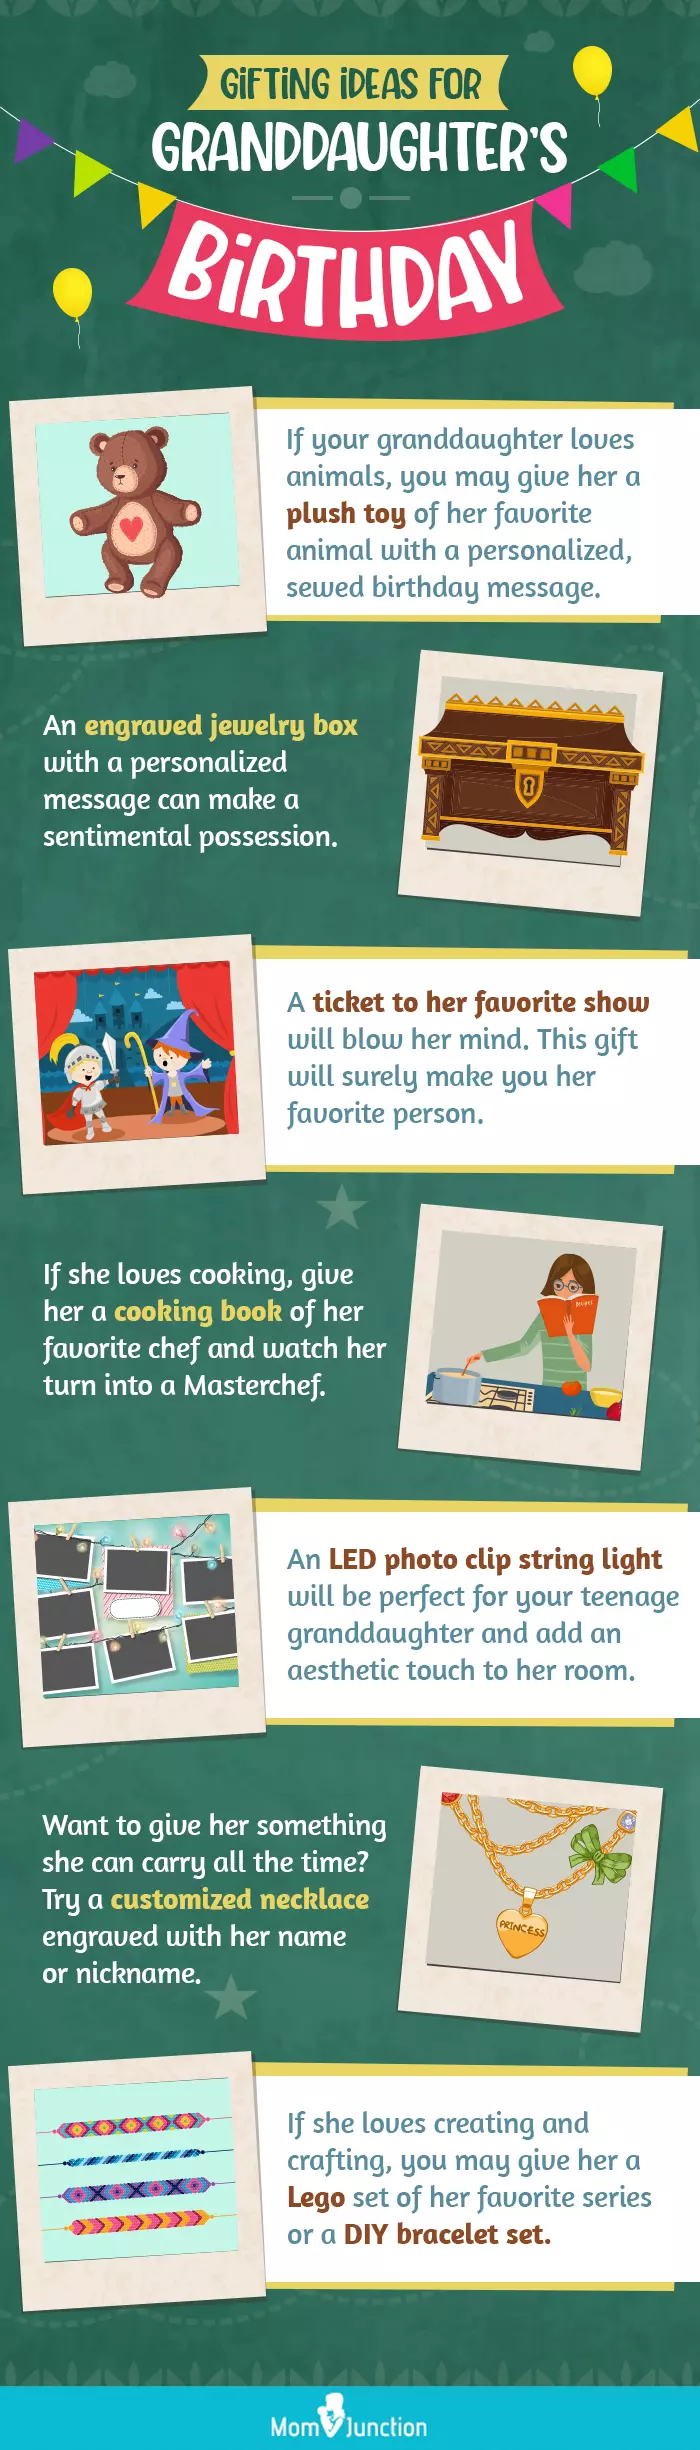 gifting ideas for granddaughter's birthday (infographic)